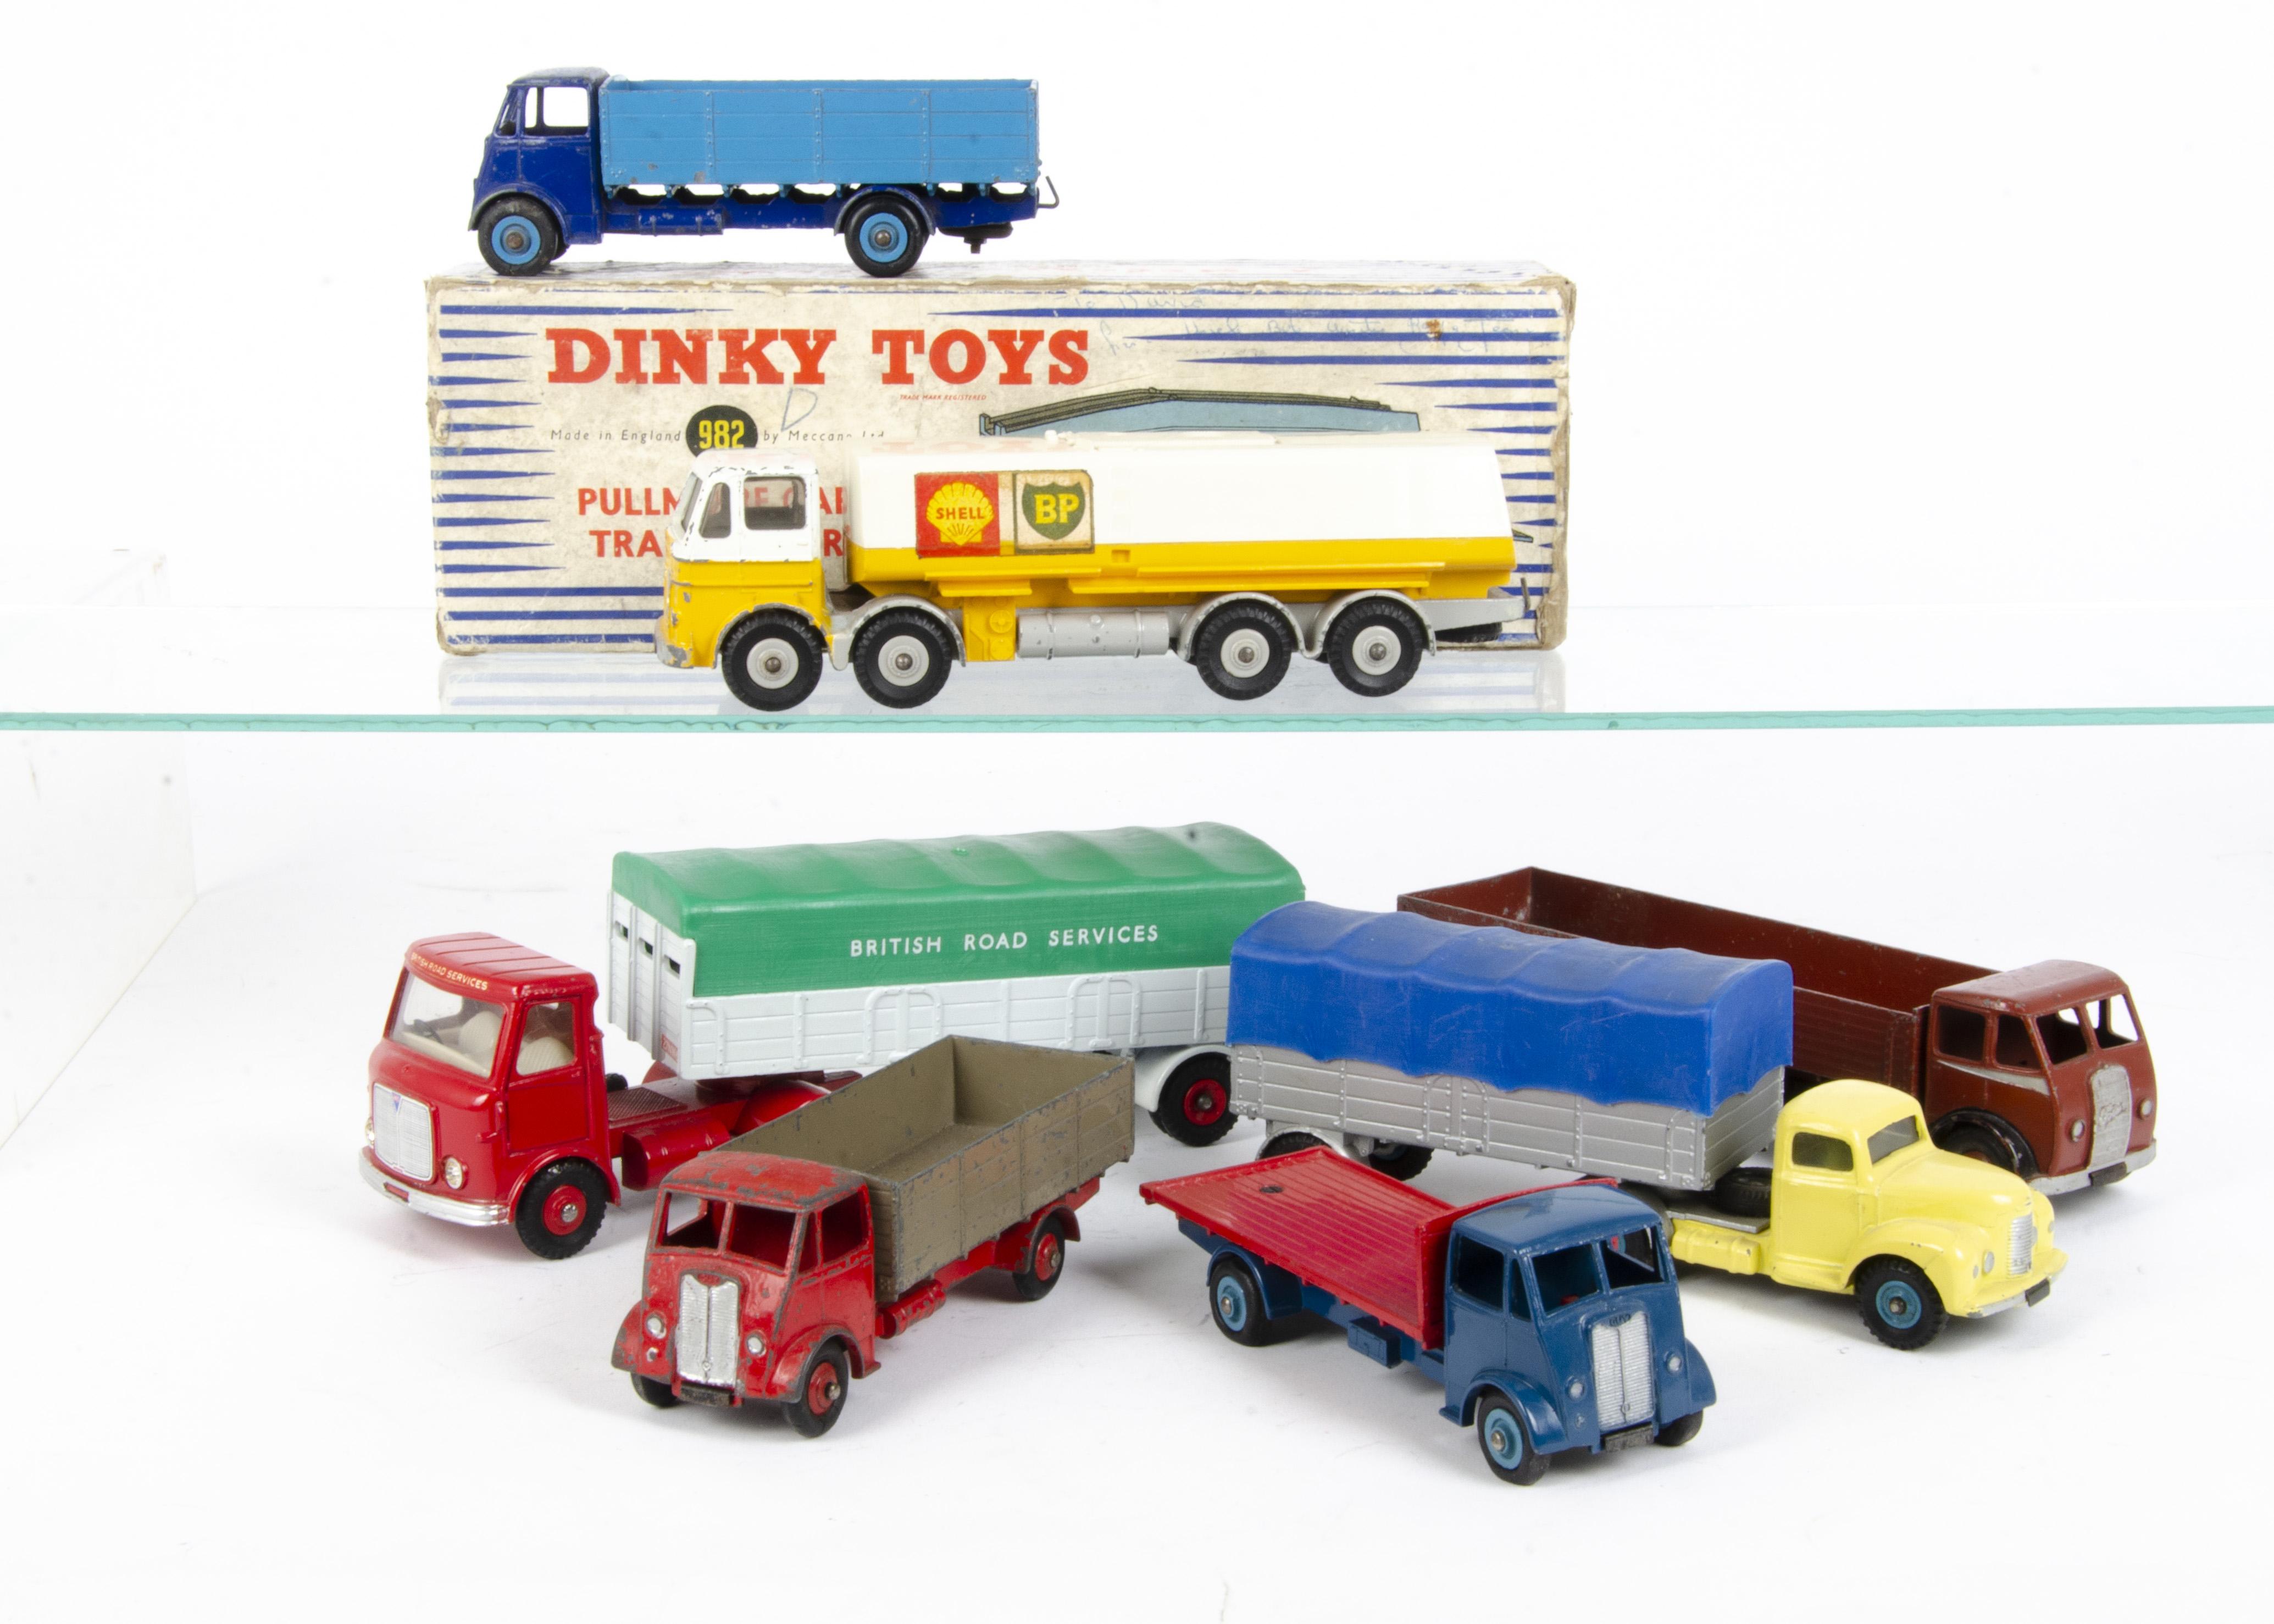 Dinky Toy Large Commercial Vehicles, including 982 Pullmore Car Transporter, in original box,